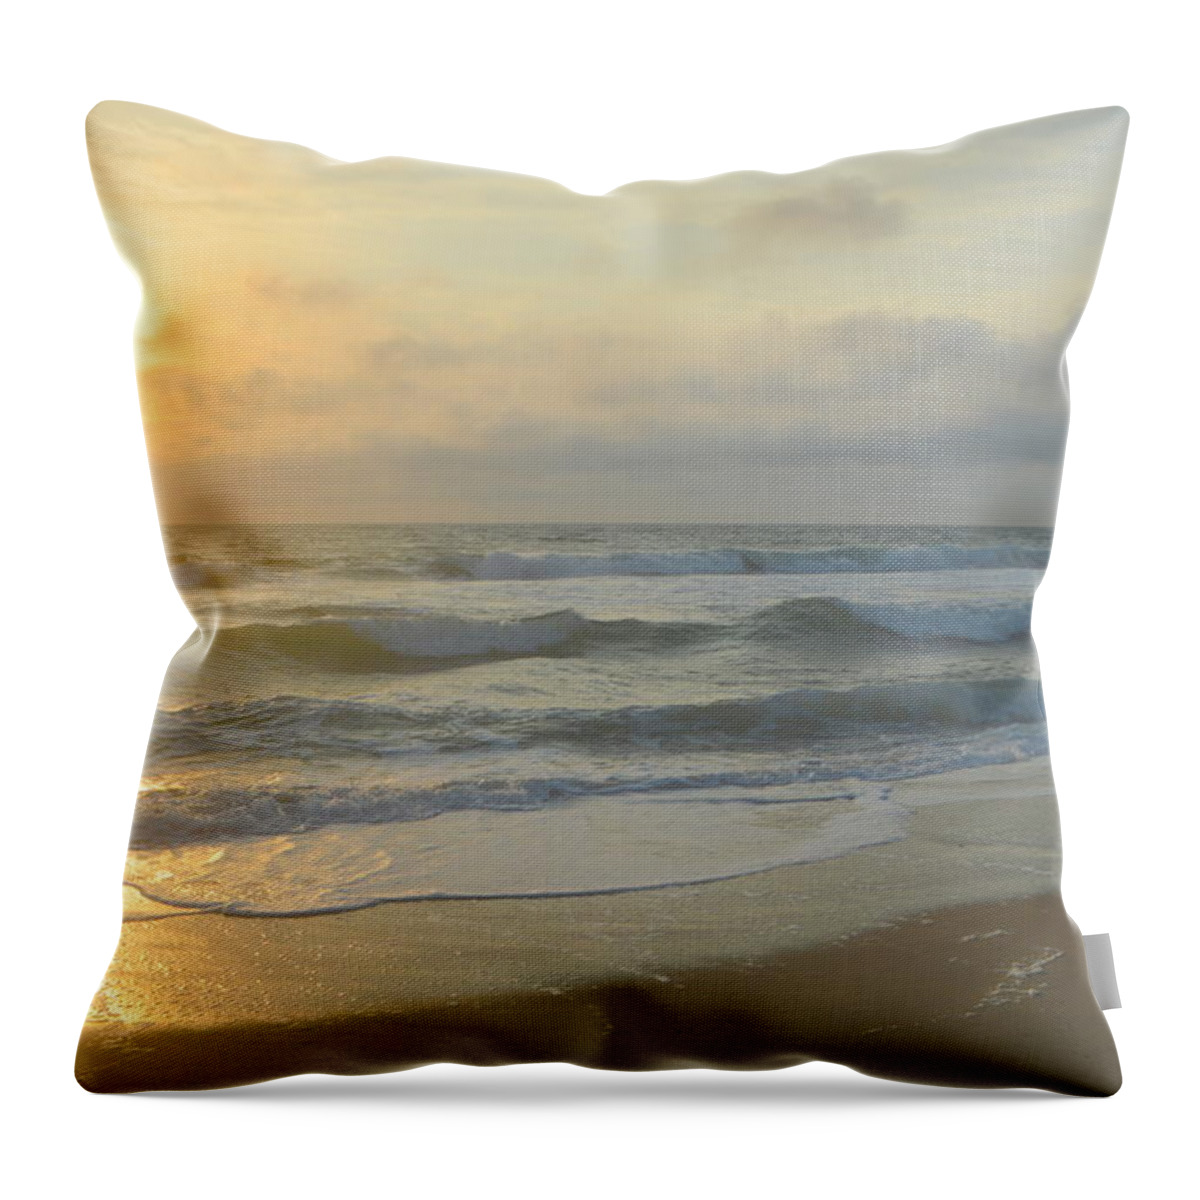 Obx Sunrise Throw Pillow featuring the photograph September 17, 2019 by Barbara Ann Bell